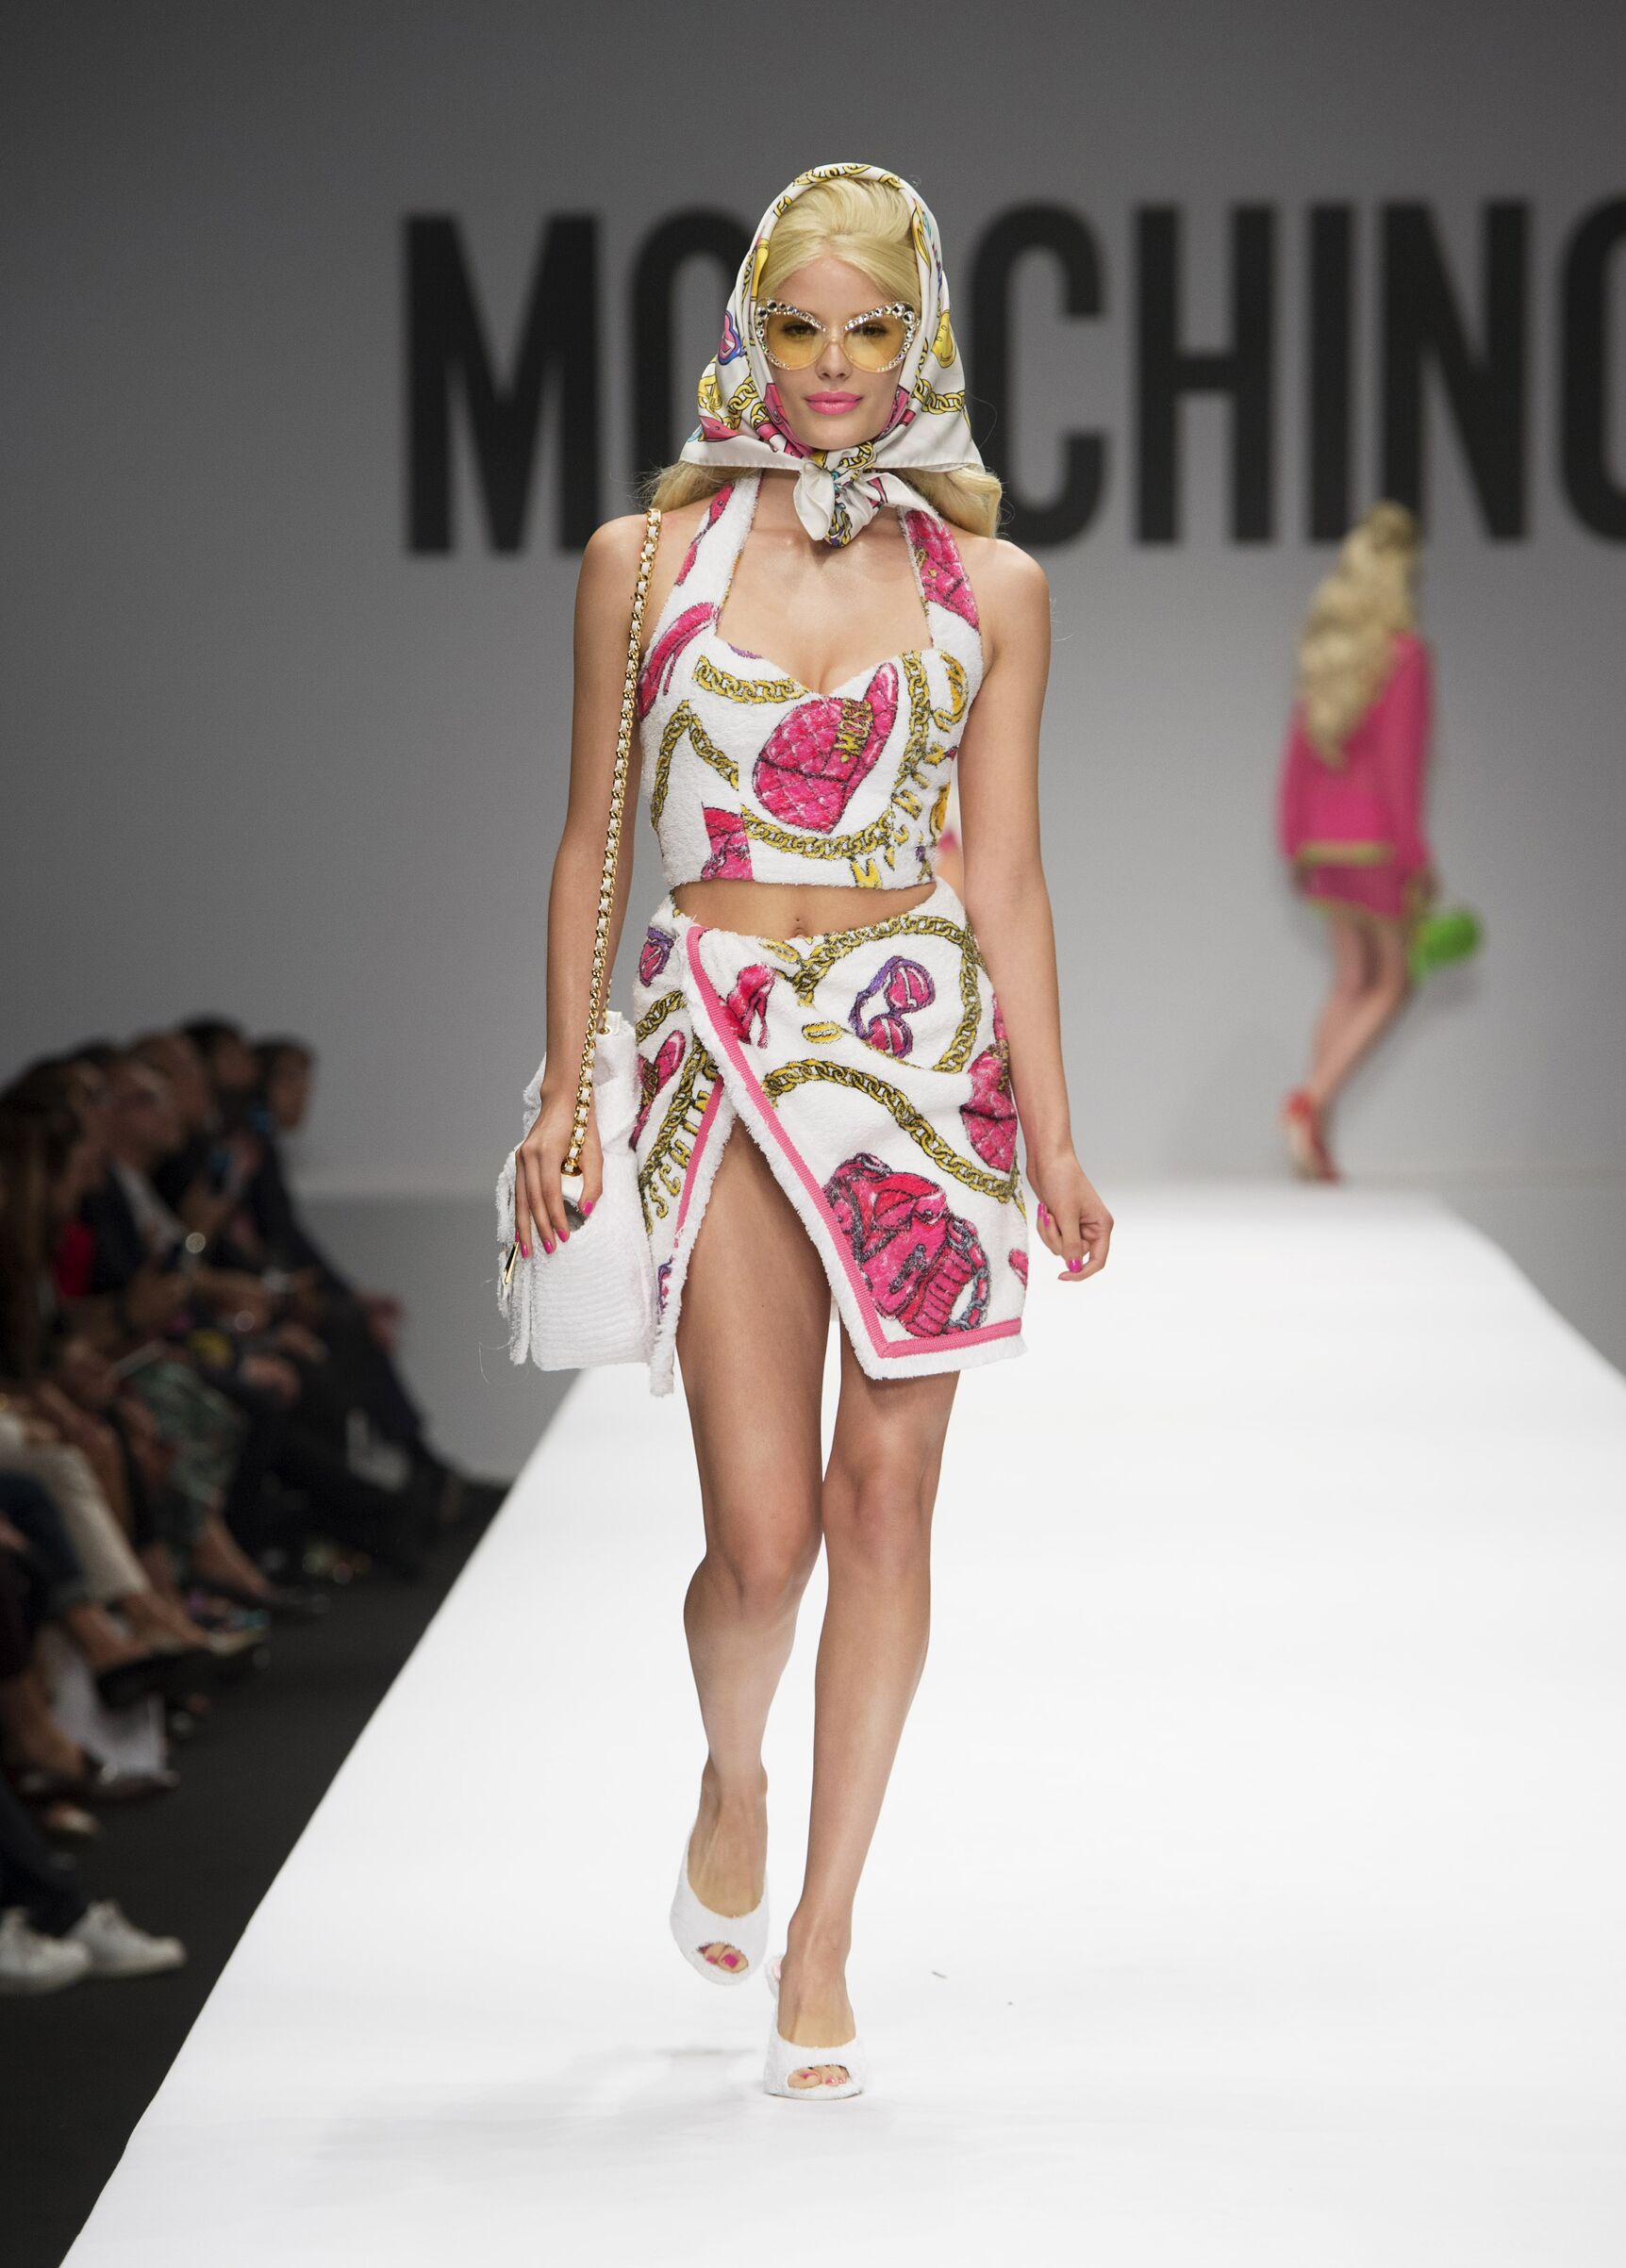 MOSCHINO SPRING SUMMER 2015 WOMEN'S COLLECTION | The Skinny Beep